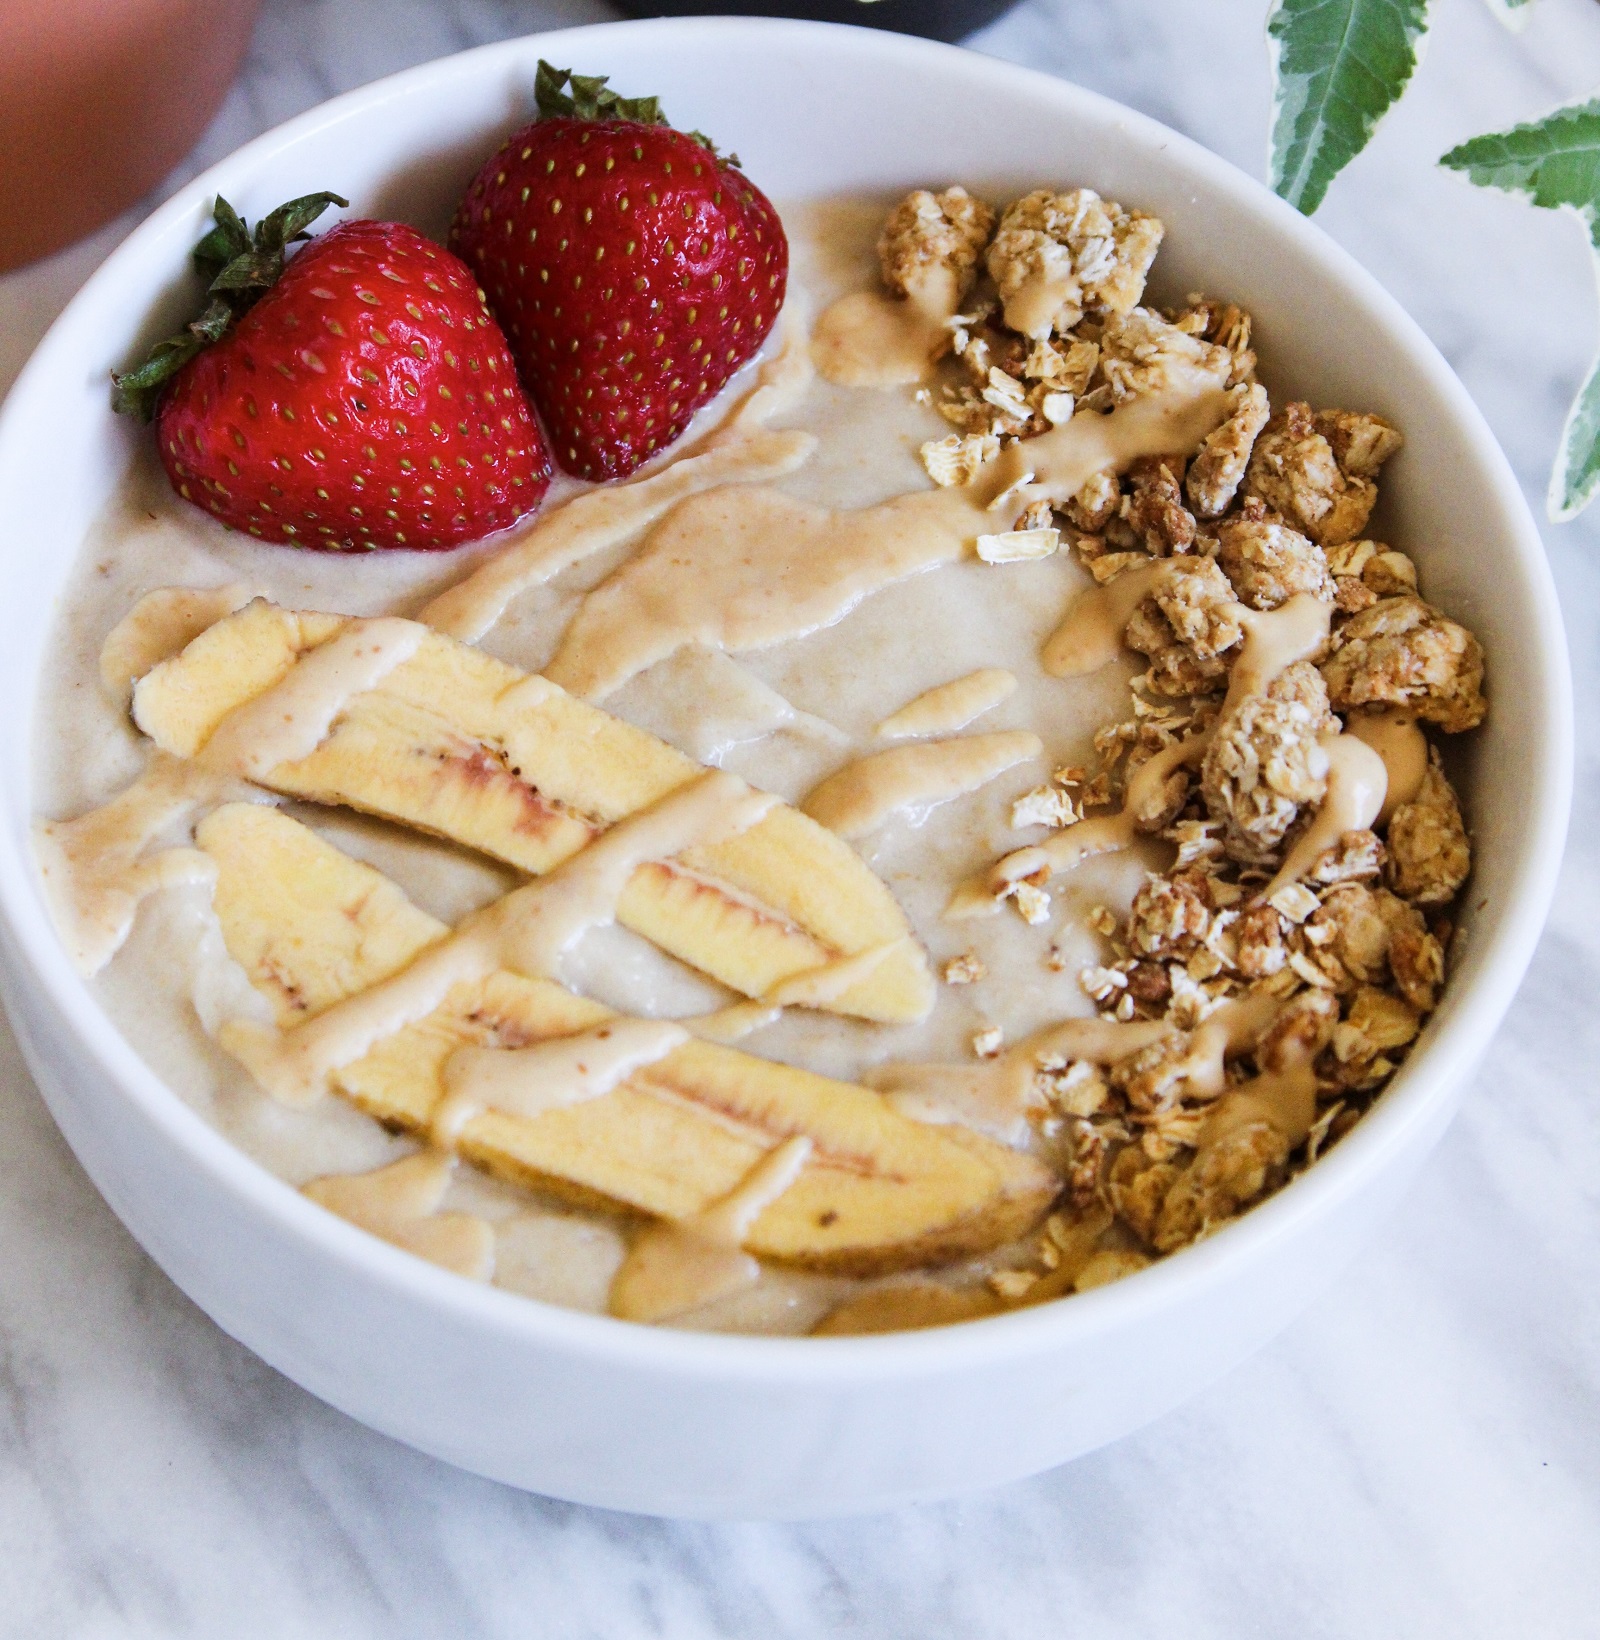 peanut butter banana smoothie bowl with strawberries and granola